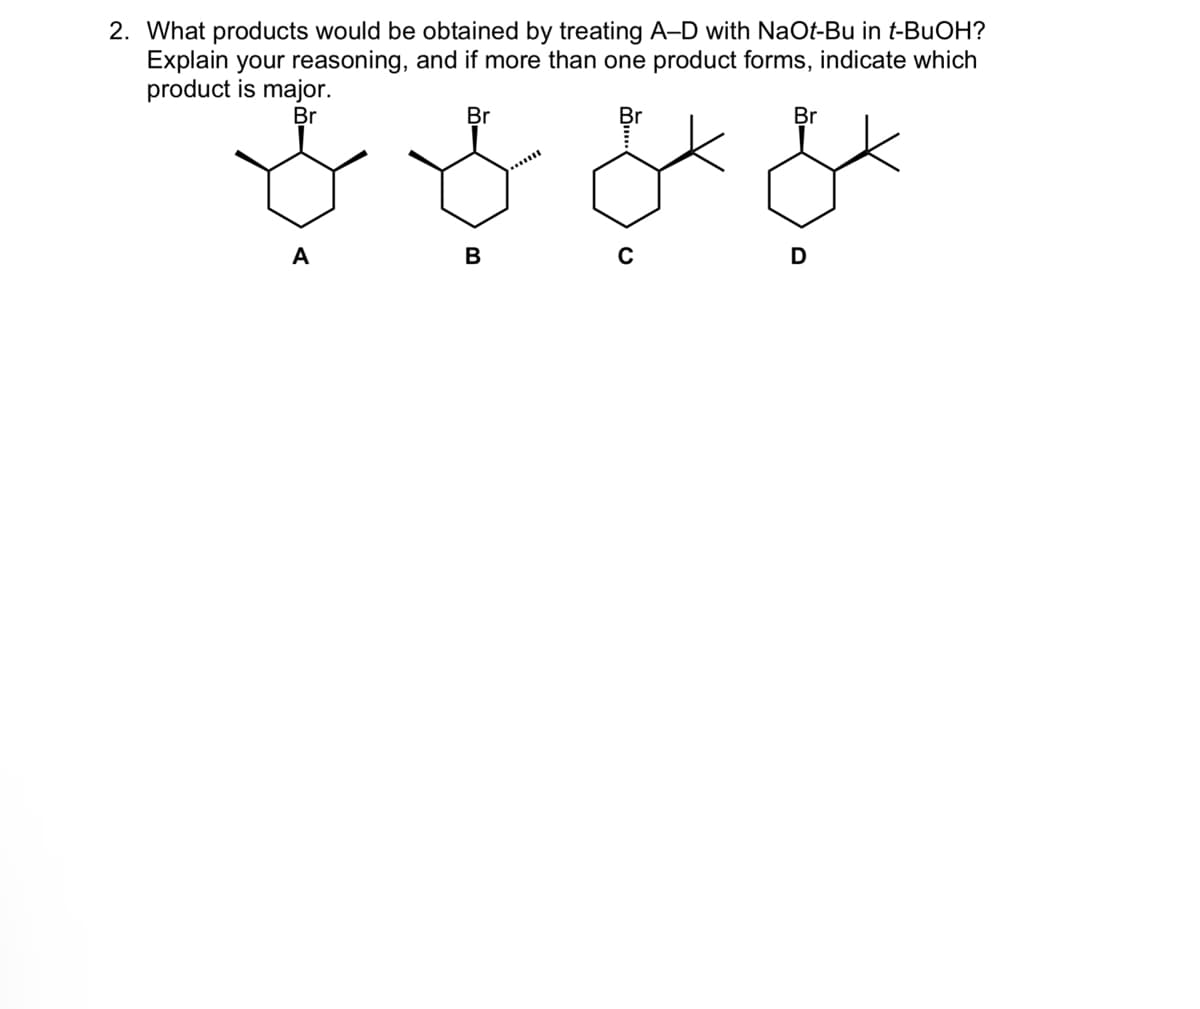 2. What products would be obtained by treating A-D with NaOt-Bu in t-BuOH?
Explain your reasoning, and if more than one product forms, indicate which
product is major.
Br
A
Br
B
C
لي
Br
D